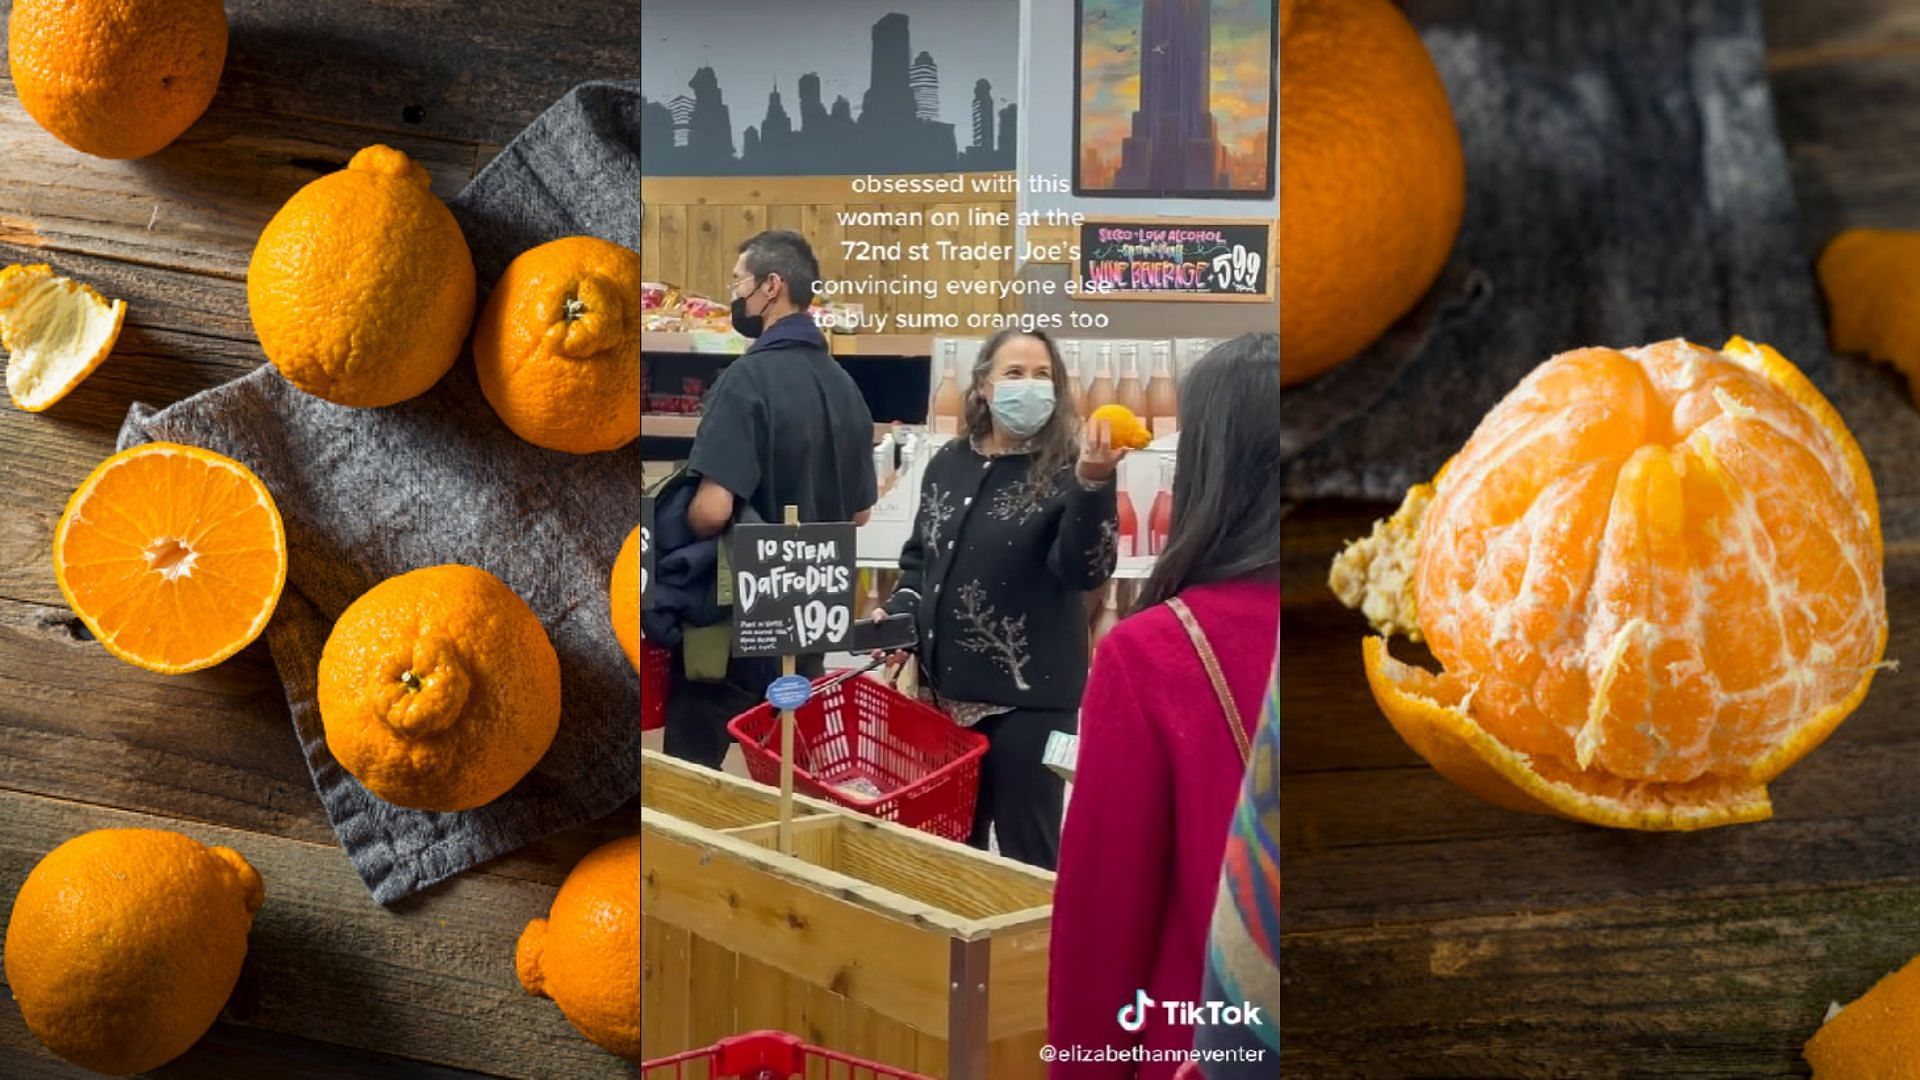 Sumo oranges are all the rage on TikTok after a video of an enthusiastic Trader Joe&#039;s customer goes viral (Images via bhofack2/Getty Images and elizabethanneventer/TikTok)